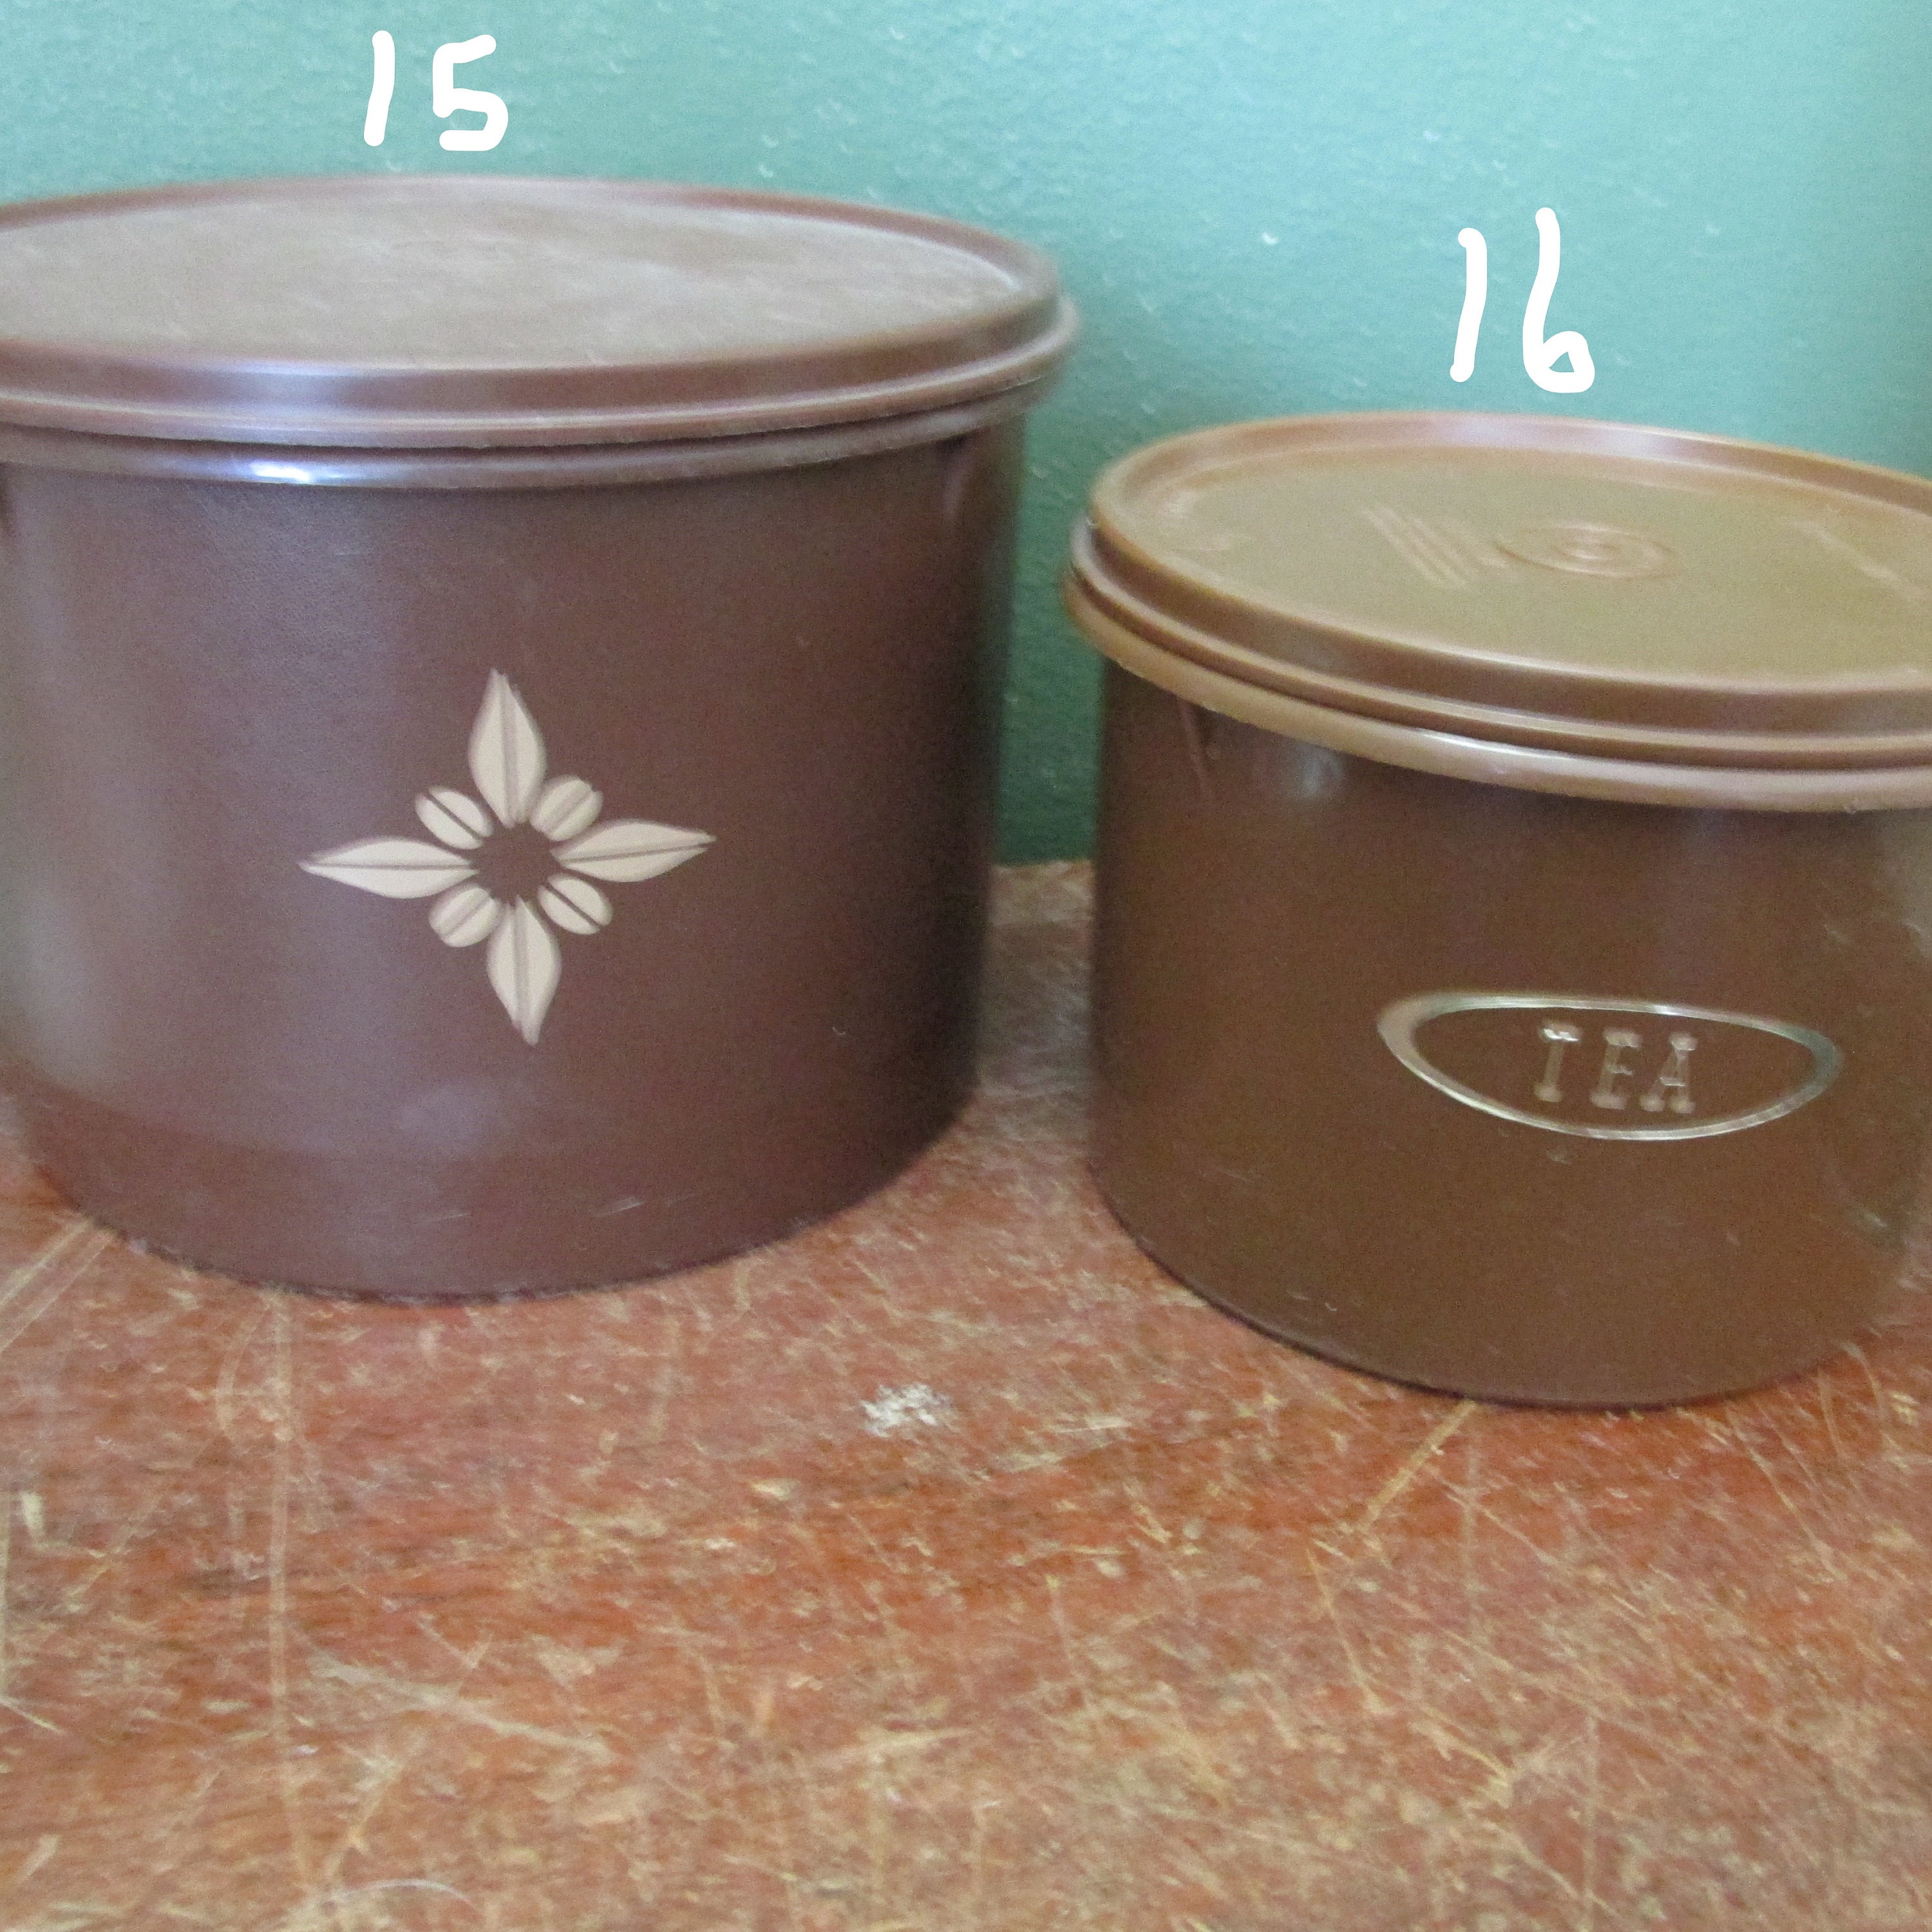 SOLD**For Sale ((by Emily)): Set of 4 Vintage Tupperware Canisters  ((Excellent Condition)) • Food for a Year